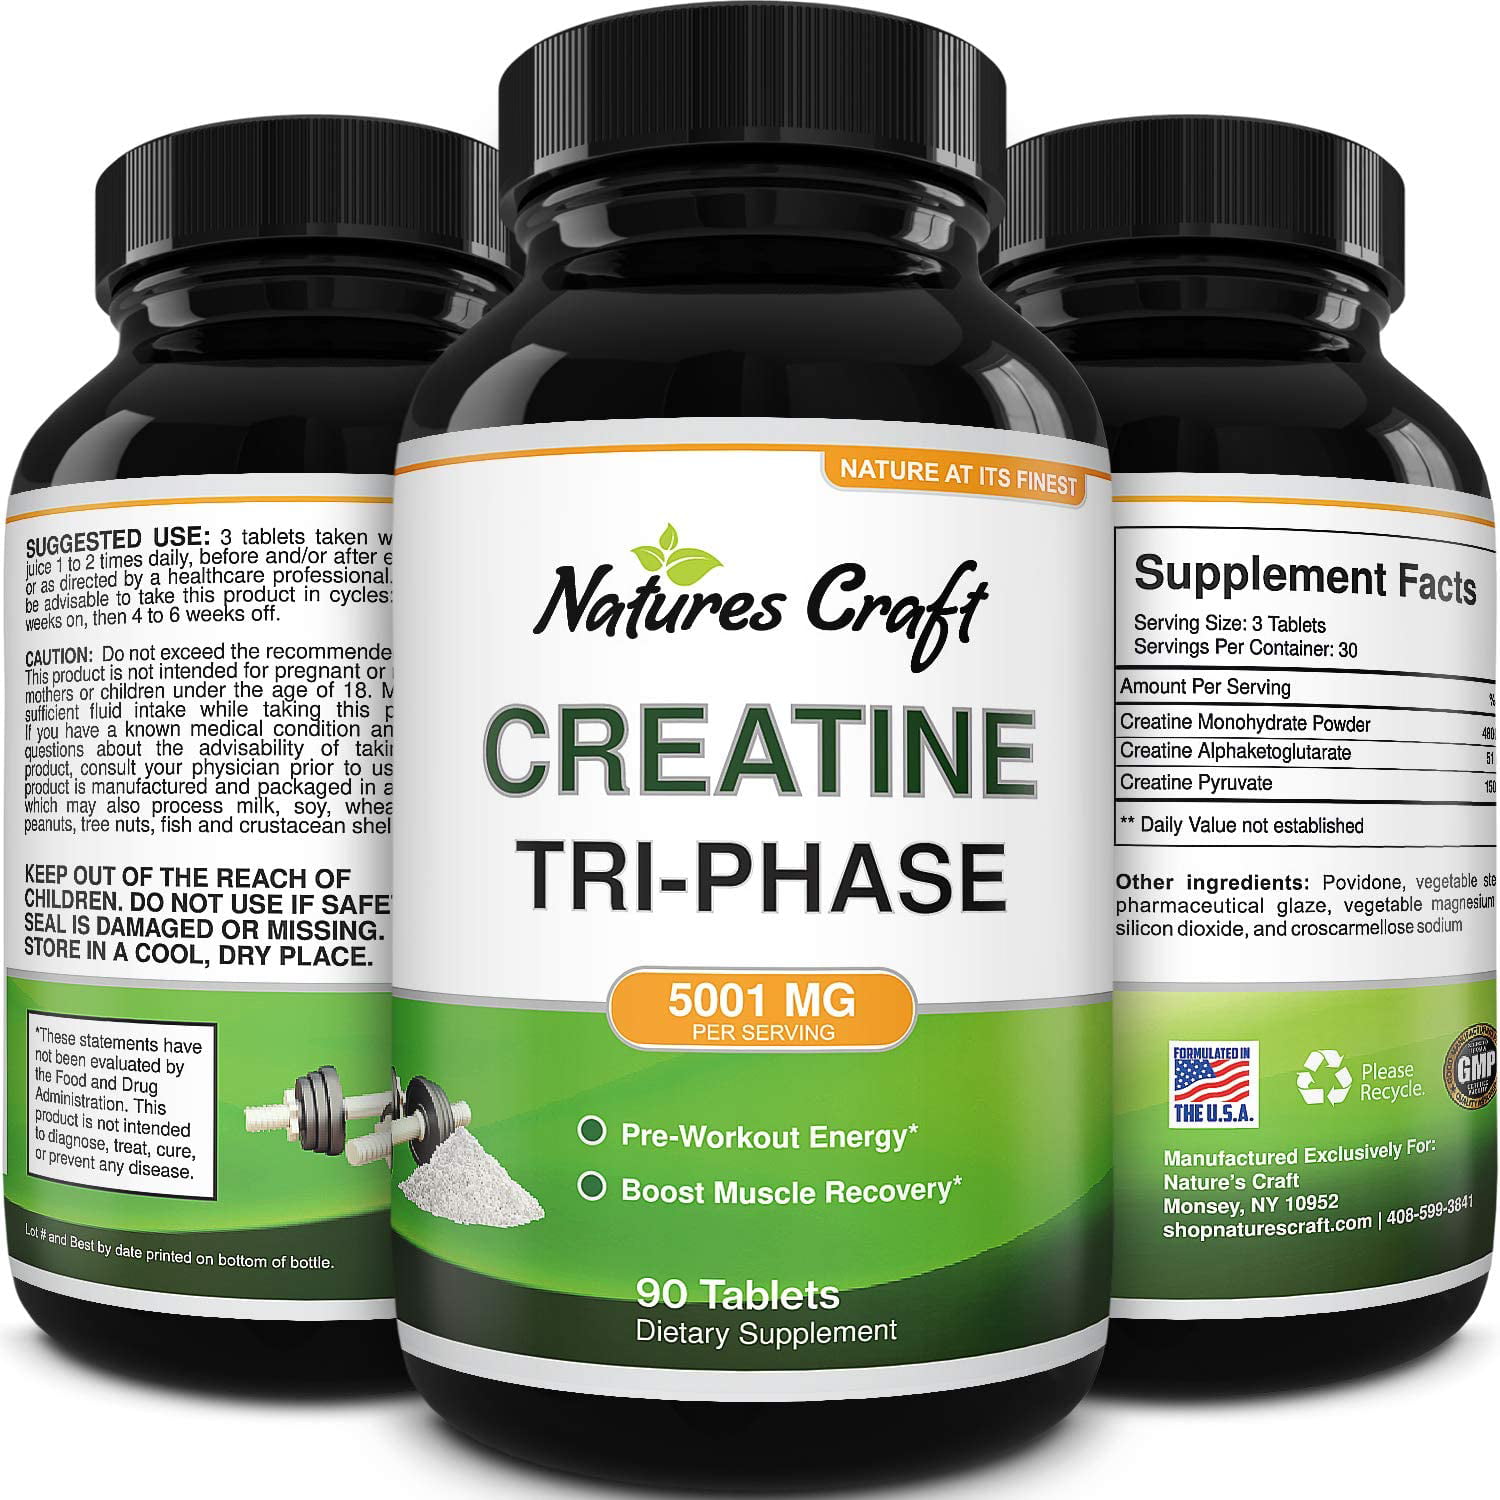 The Benefits of Creatine Supplements